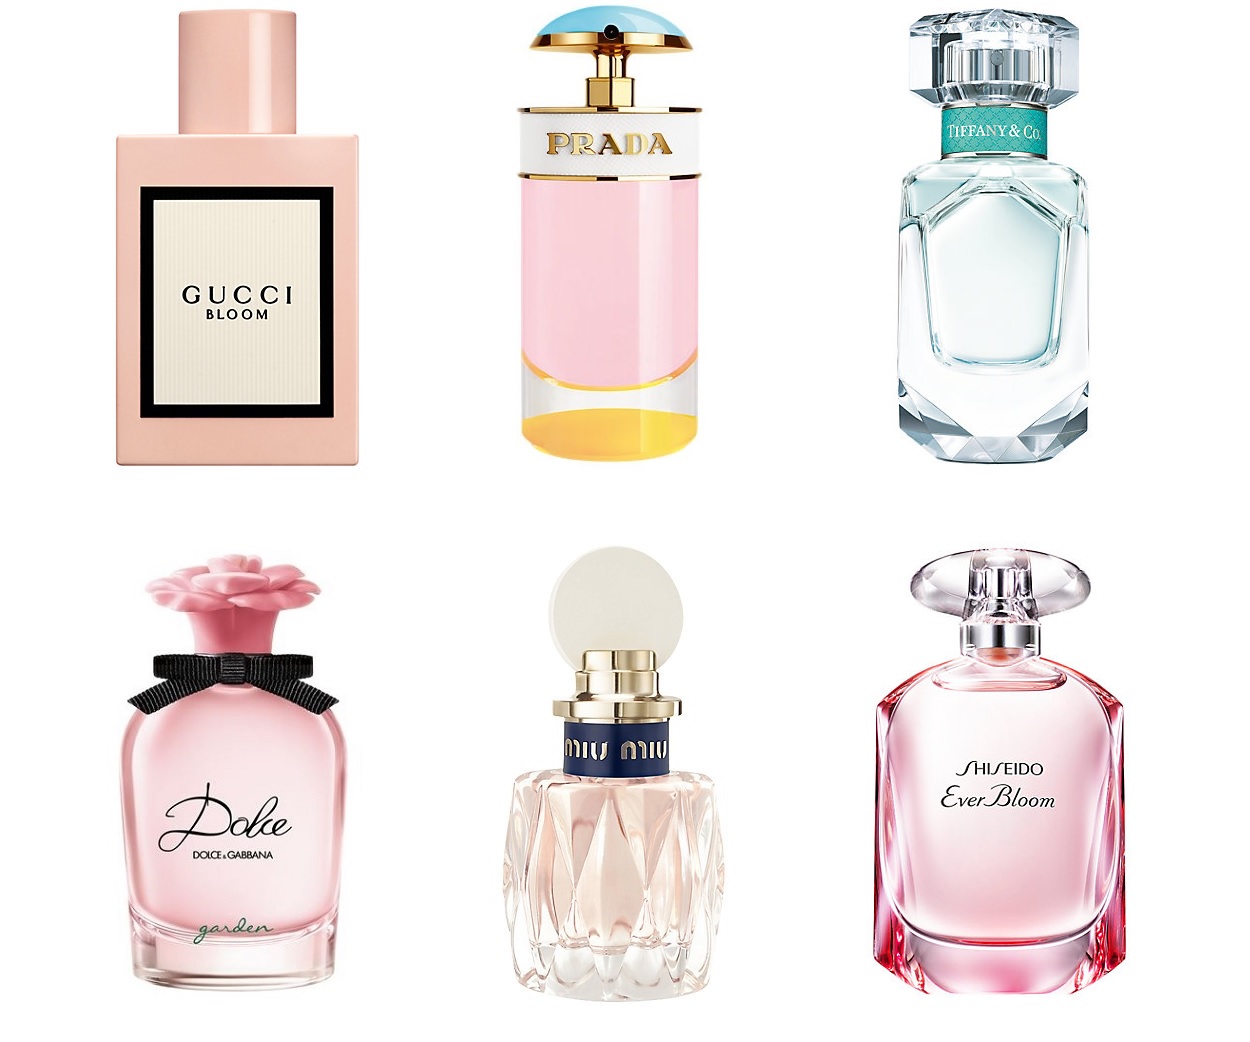 best dolce and gabbana perfume for her 2018